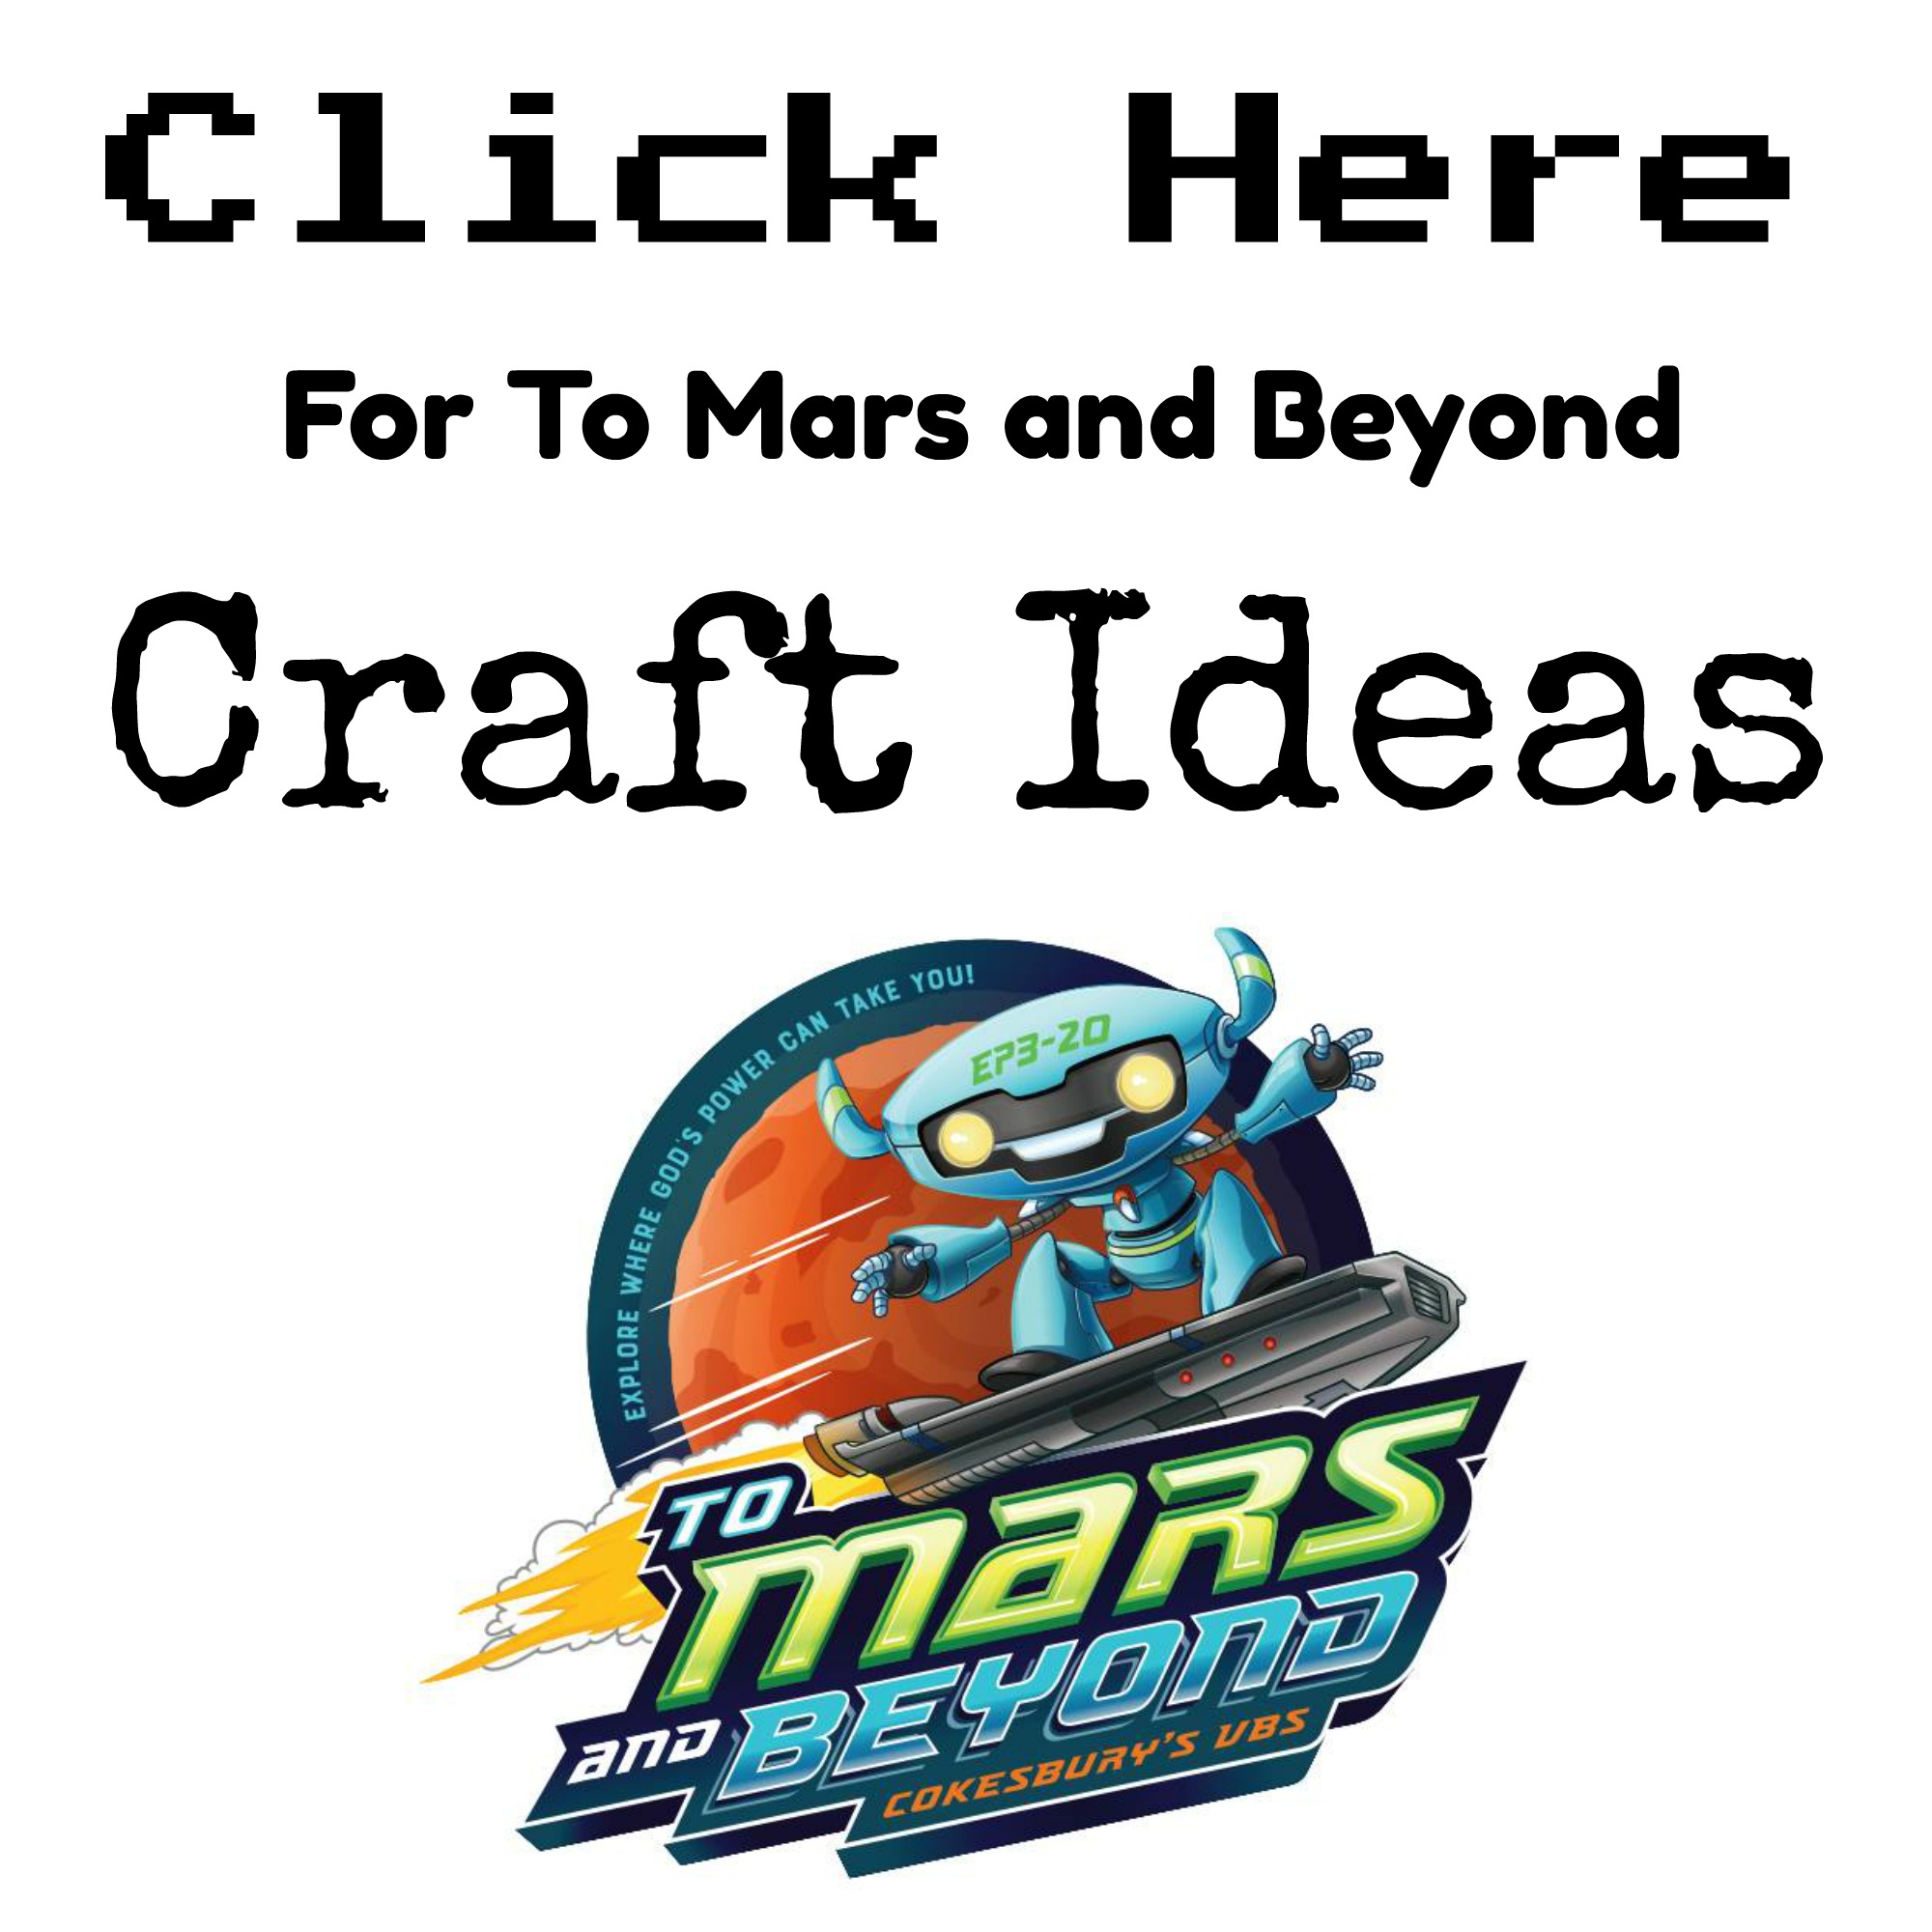 To Mars and Beyond Craft Ideas